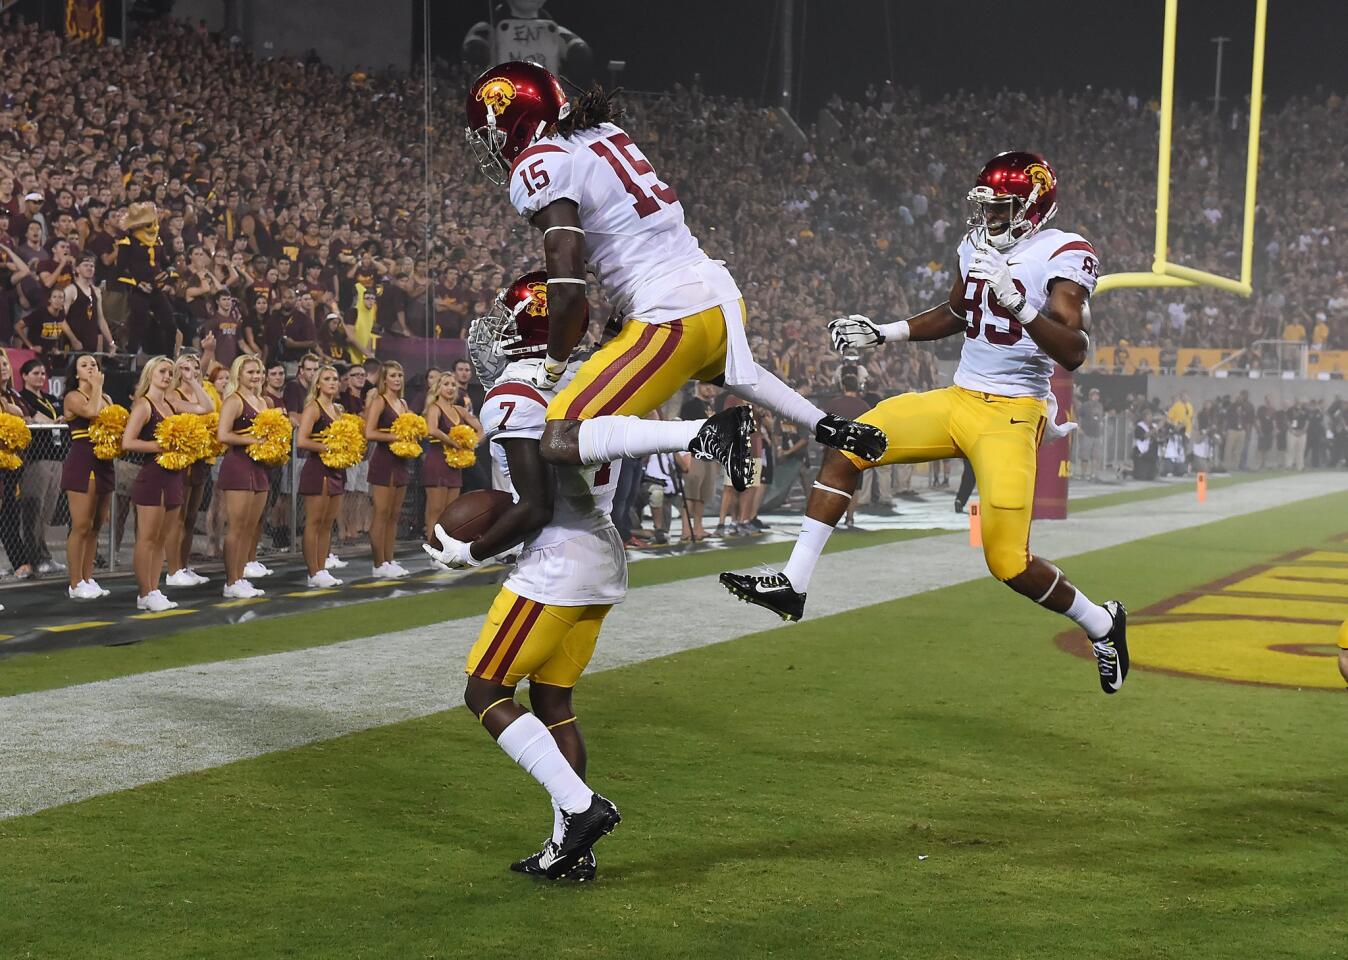 USC's Steven Mitchell Jr. (7) is joined in celebration by teammates Isaac Whitney (15) and De'Quan Hampton after his 27-yard touchdown reception in the second quarter Sept. 26 against Arizona State.